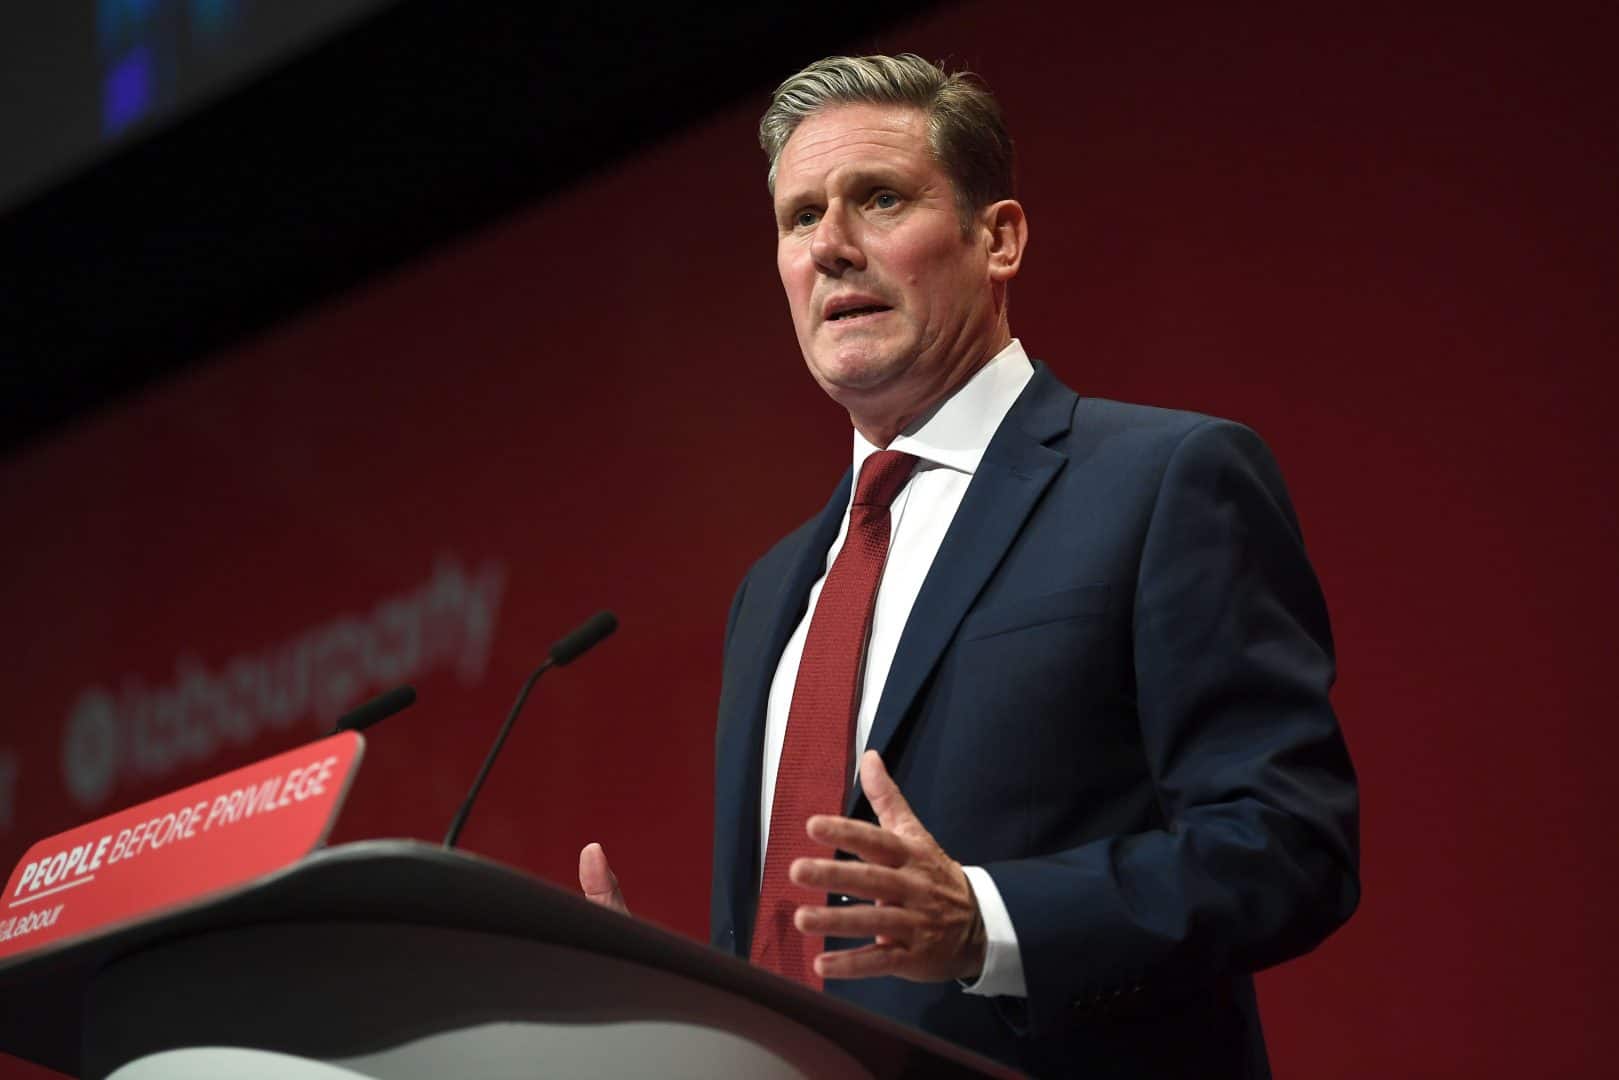 Sir Keir Starmer vows to expose Boris Johnson and win back Labour voters who voted Tory